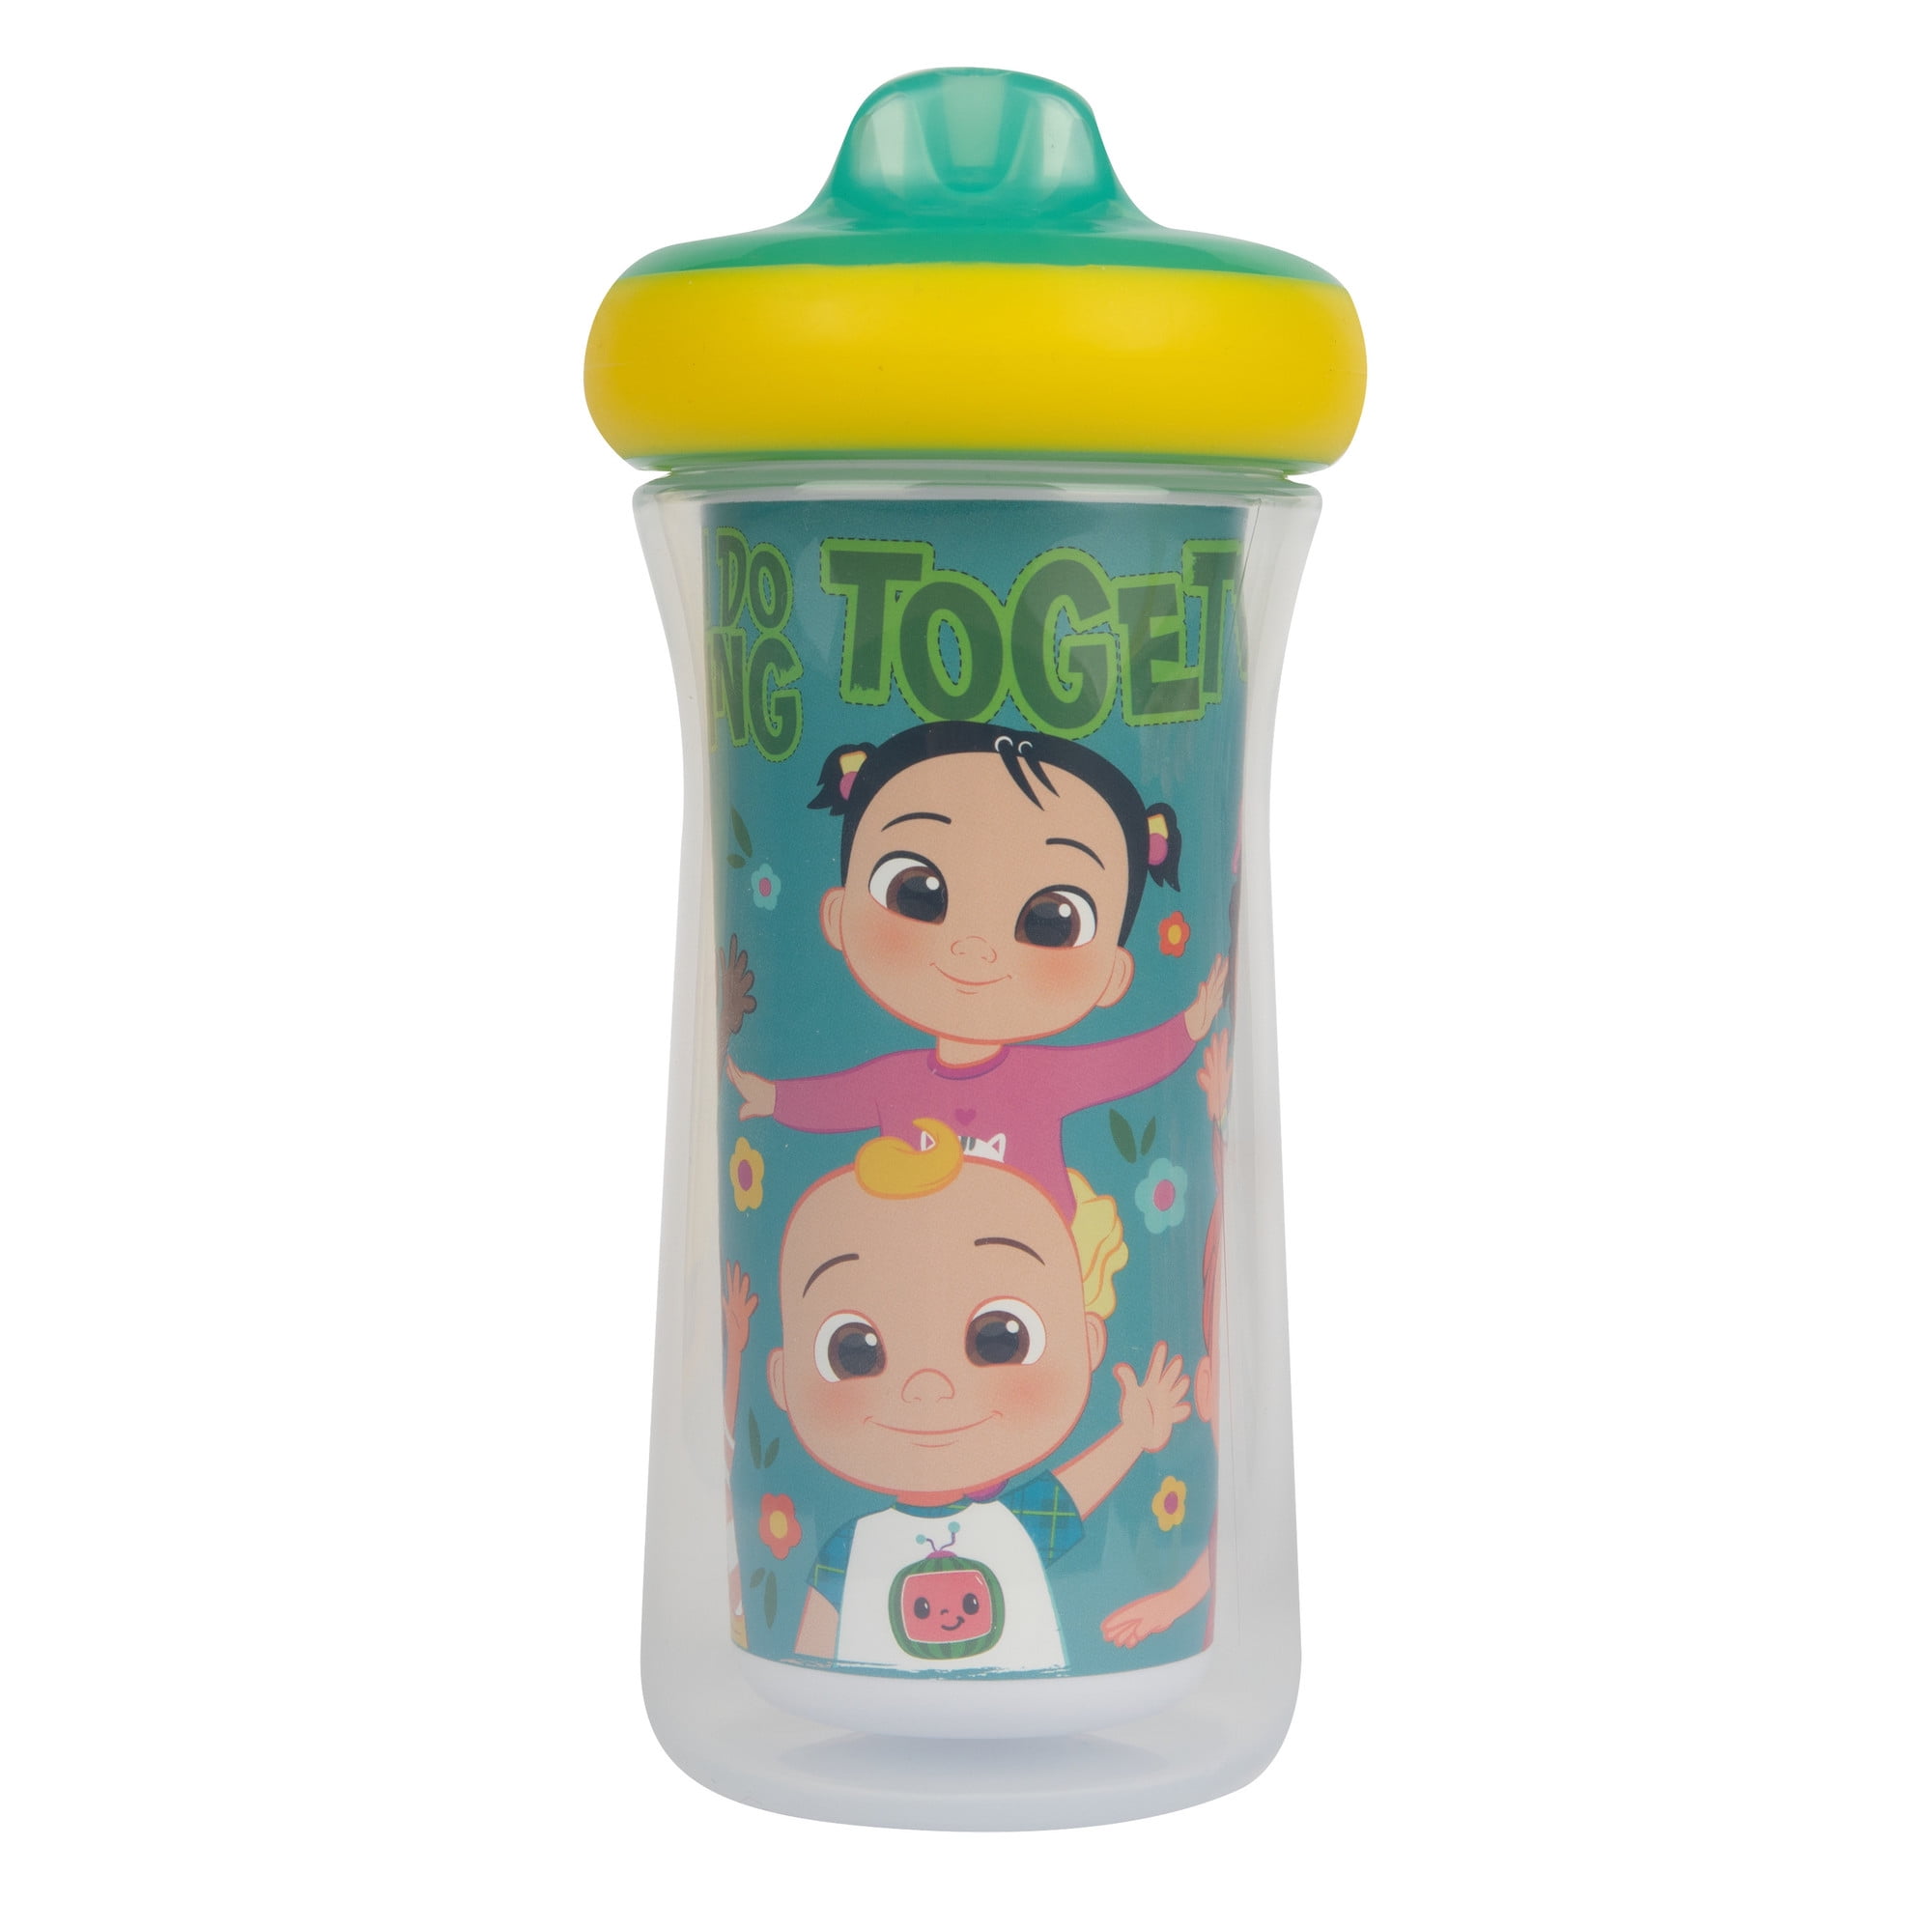 SUPERMAMA Sippy Cups for 1+ Year Old with Spout & Straw(9 Oz